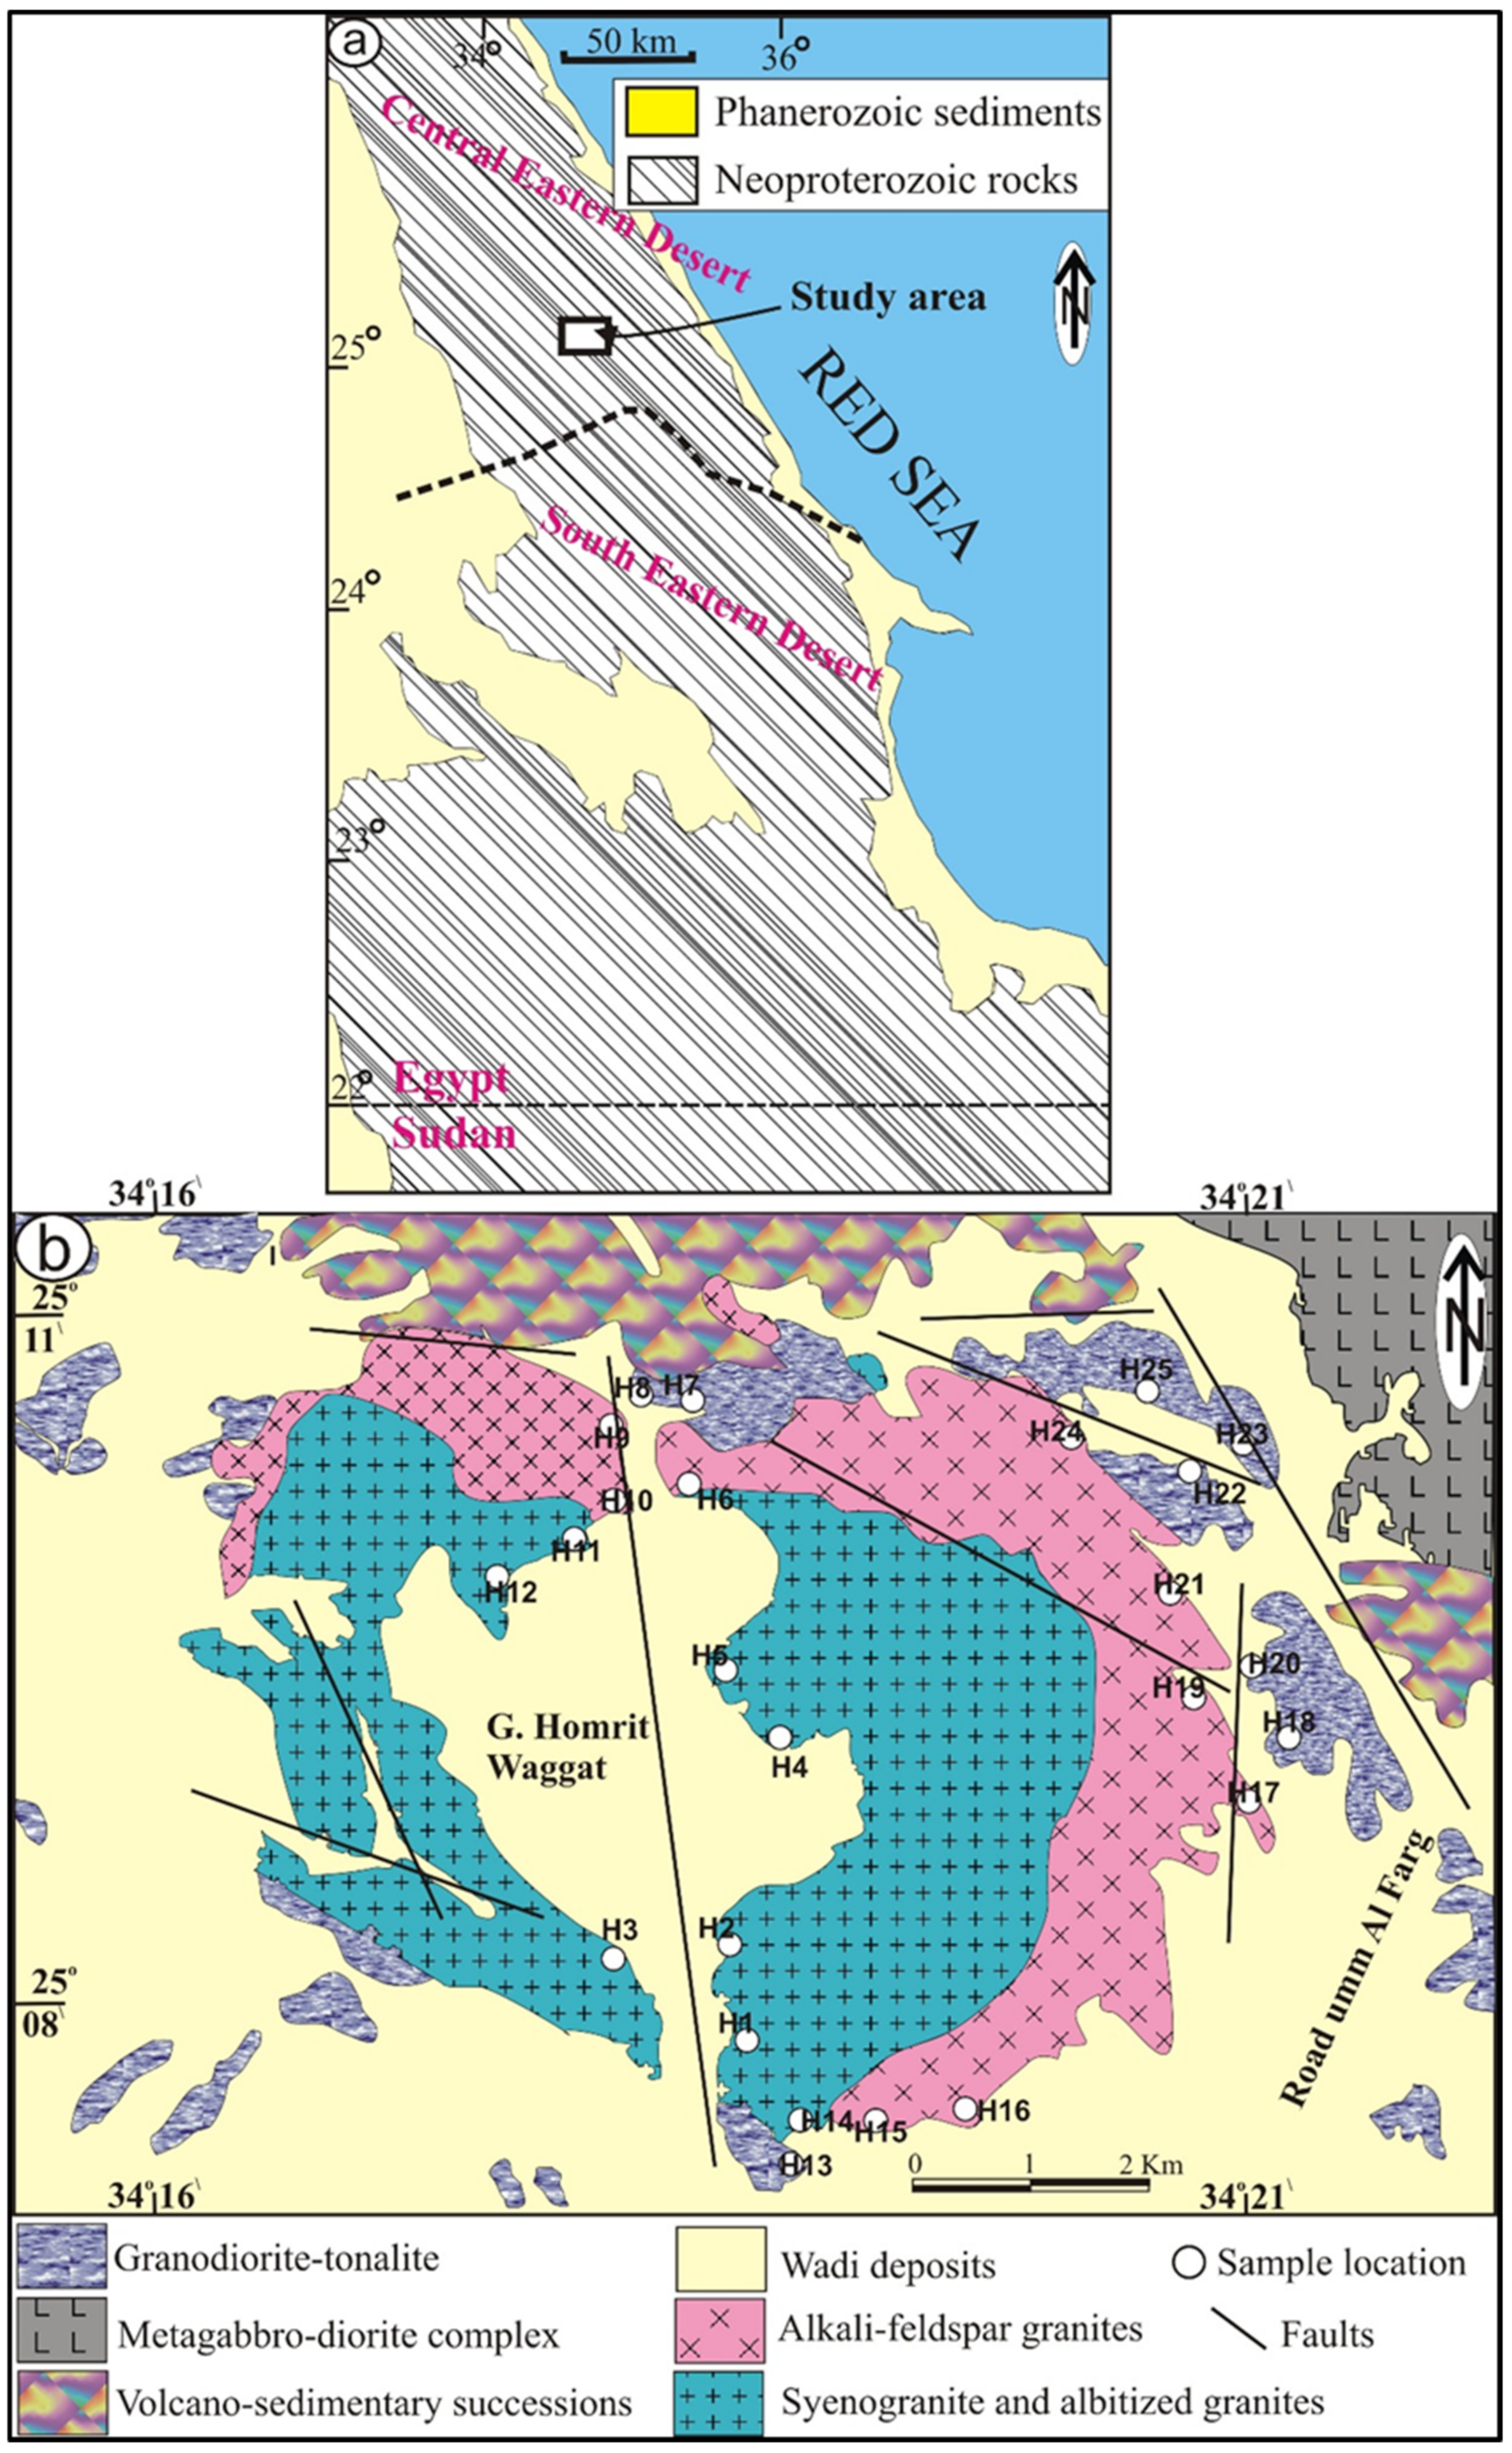 Applied Sciences | Free Full-Text | Implementation of Petrographical and  Aeromagnetic Data to Determine Depth and Structural Trend of Homrit Waggat  Area, Central Eastern Desert, Egypt